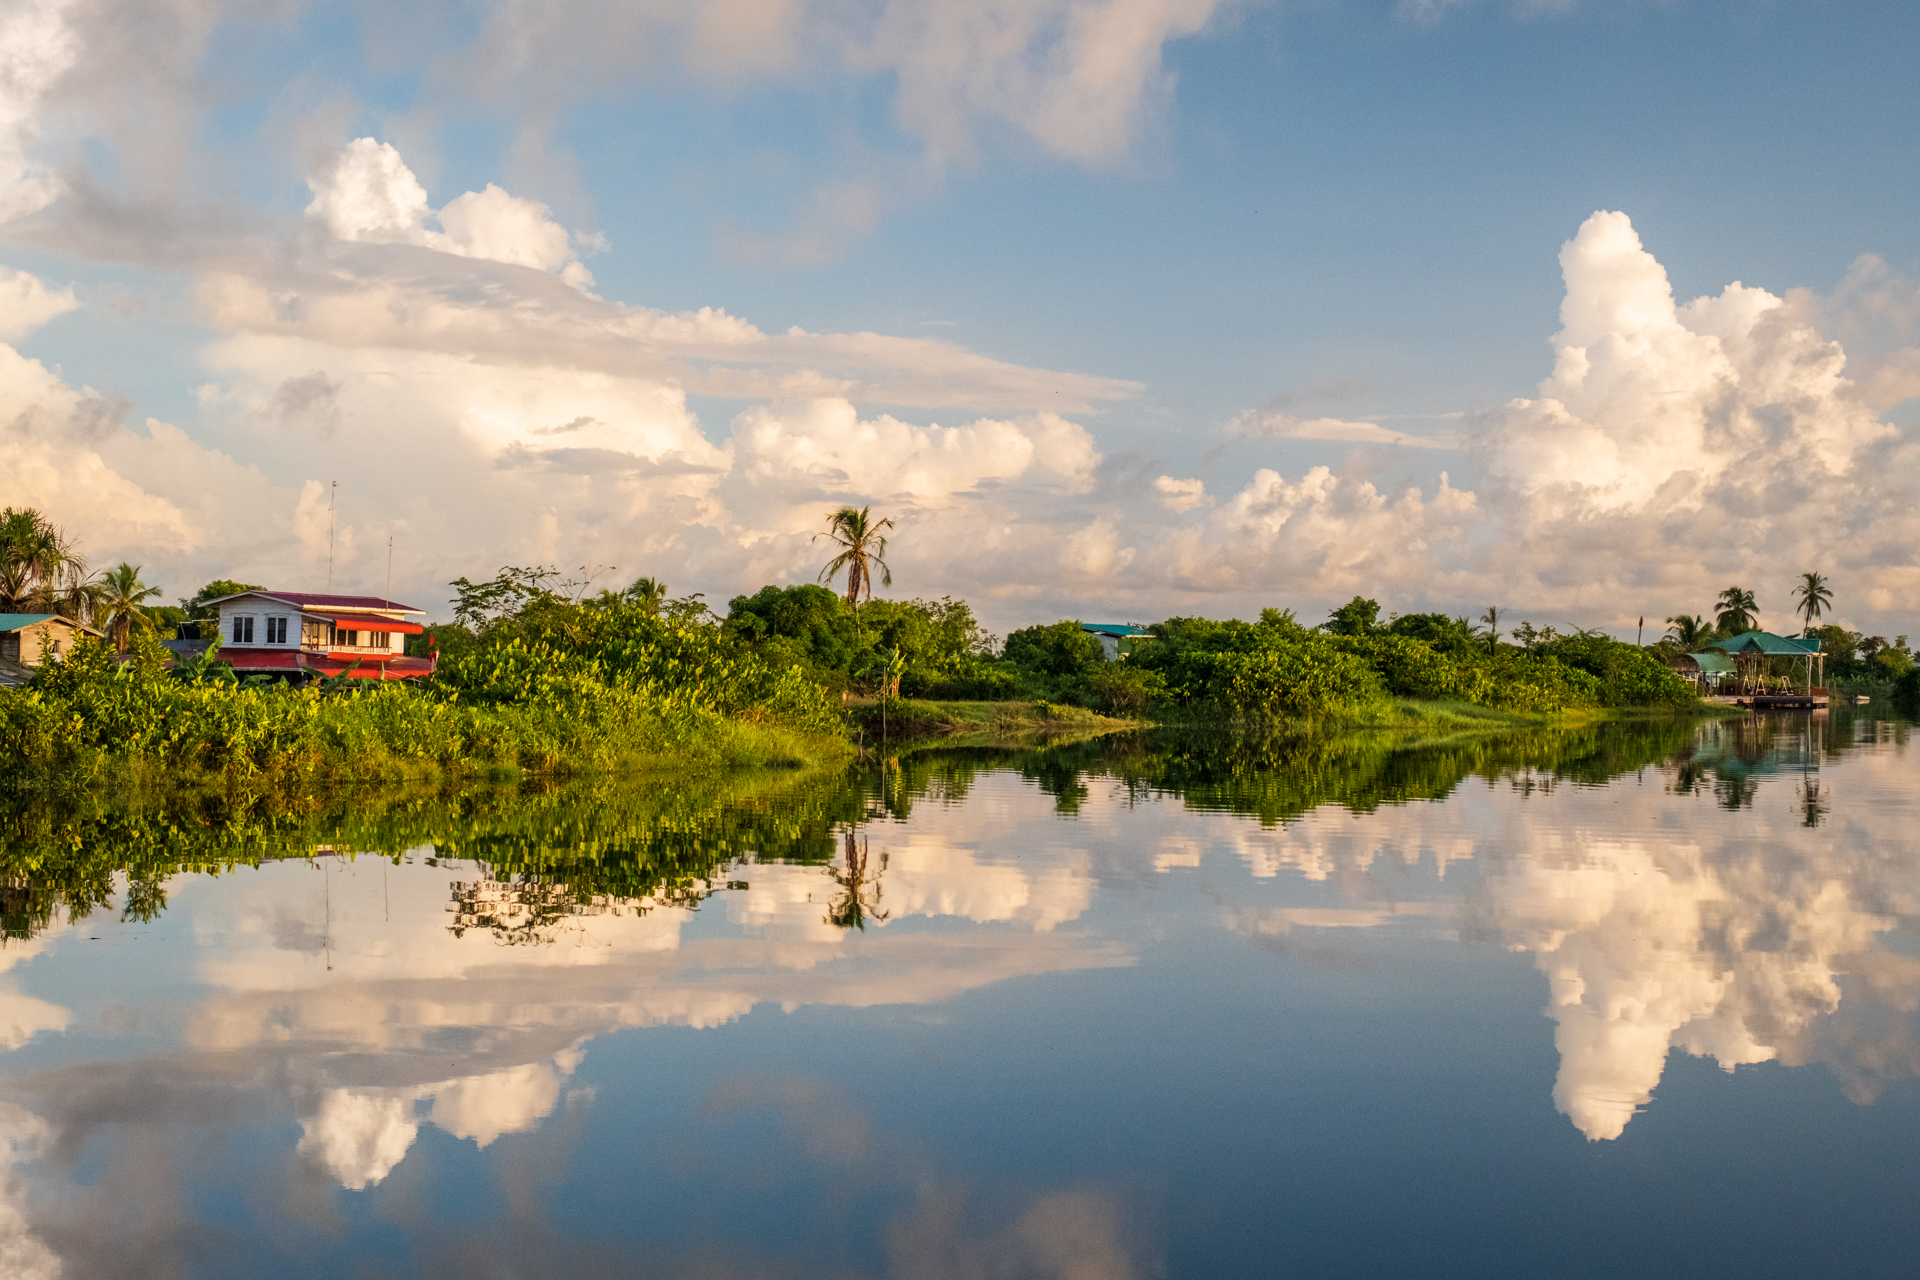 A reflection on the Mahican river in Guyana.